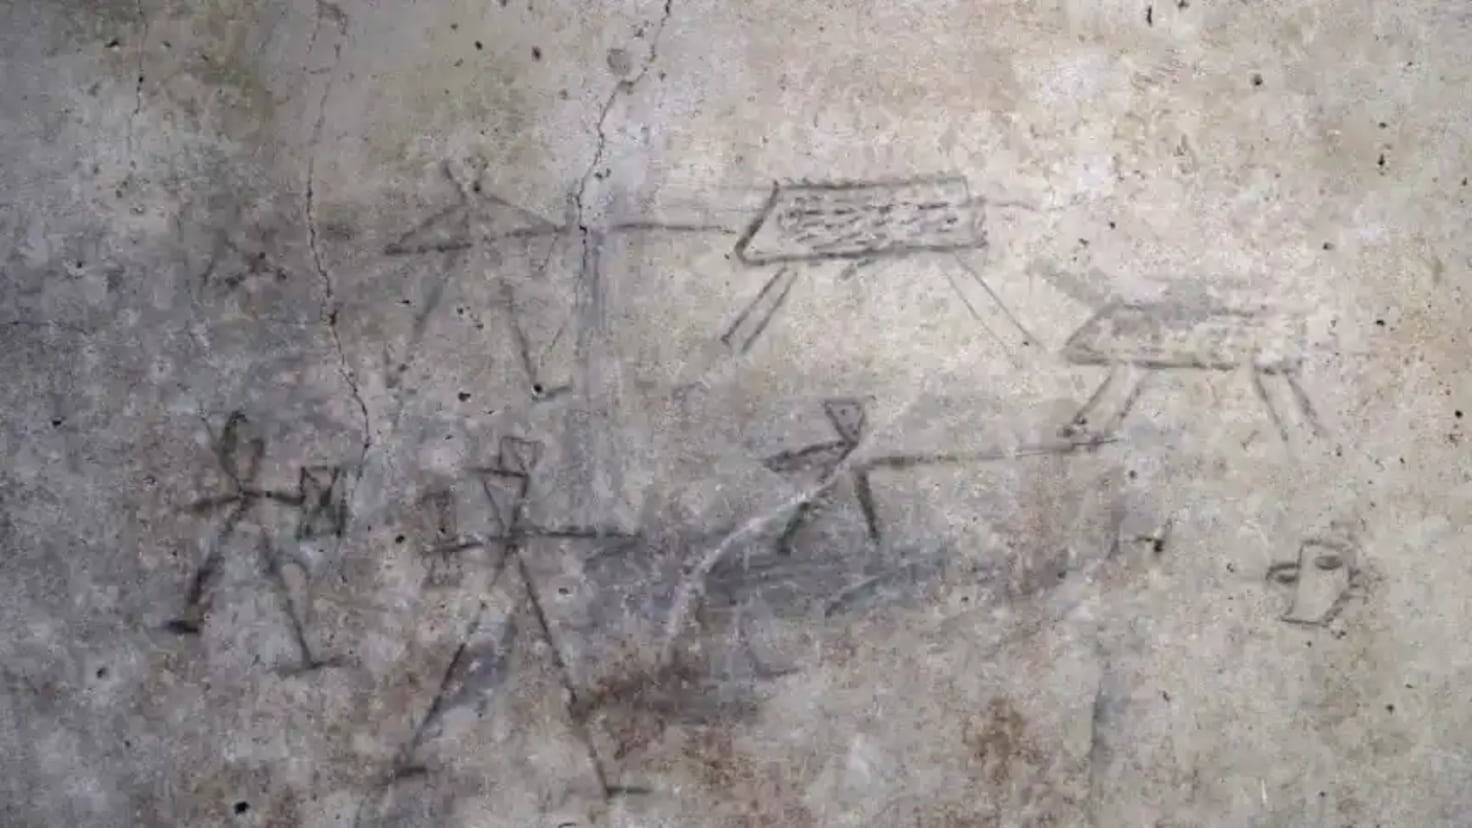 Extraordinary find in a house in Pompeii
